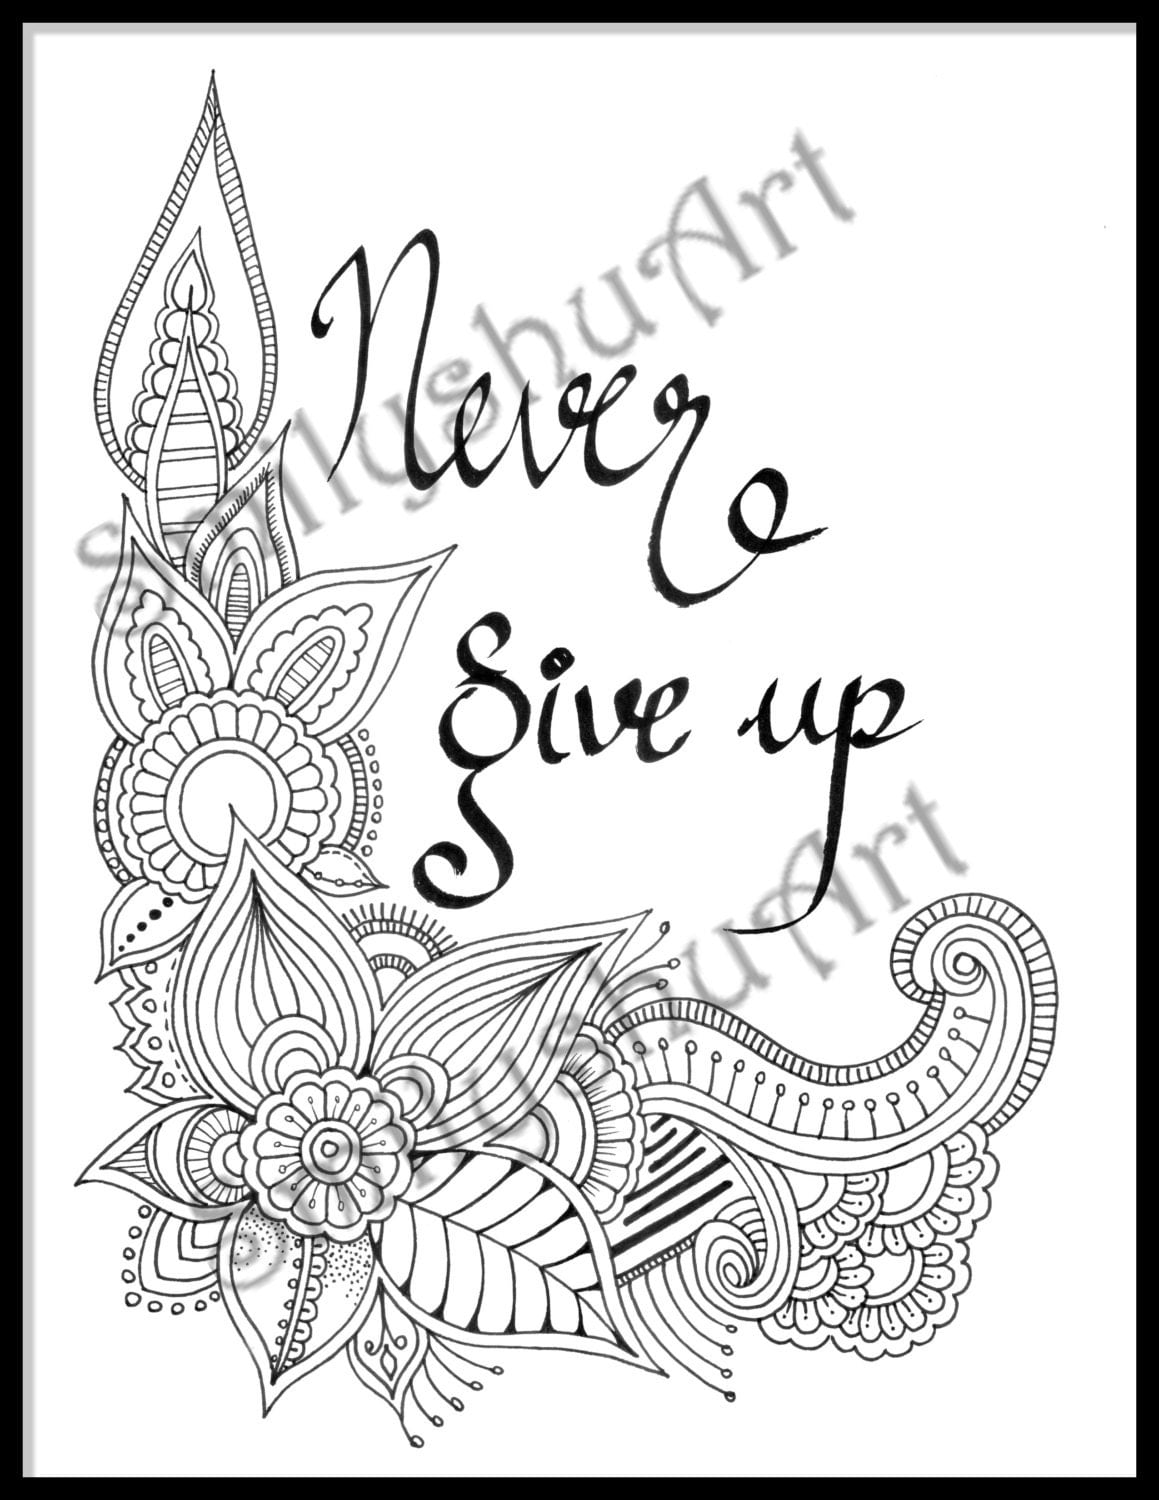 Motivational Coloring Pages for Adults | Thousand of the ...